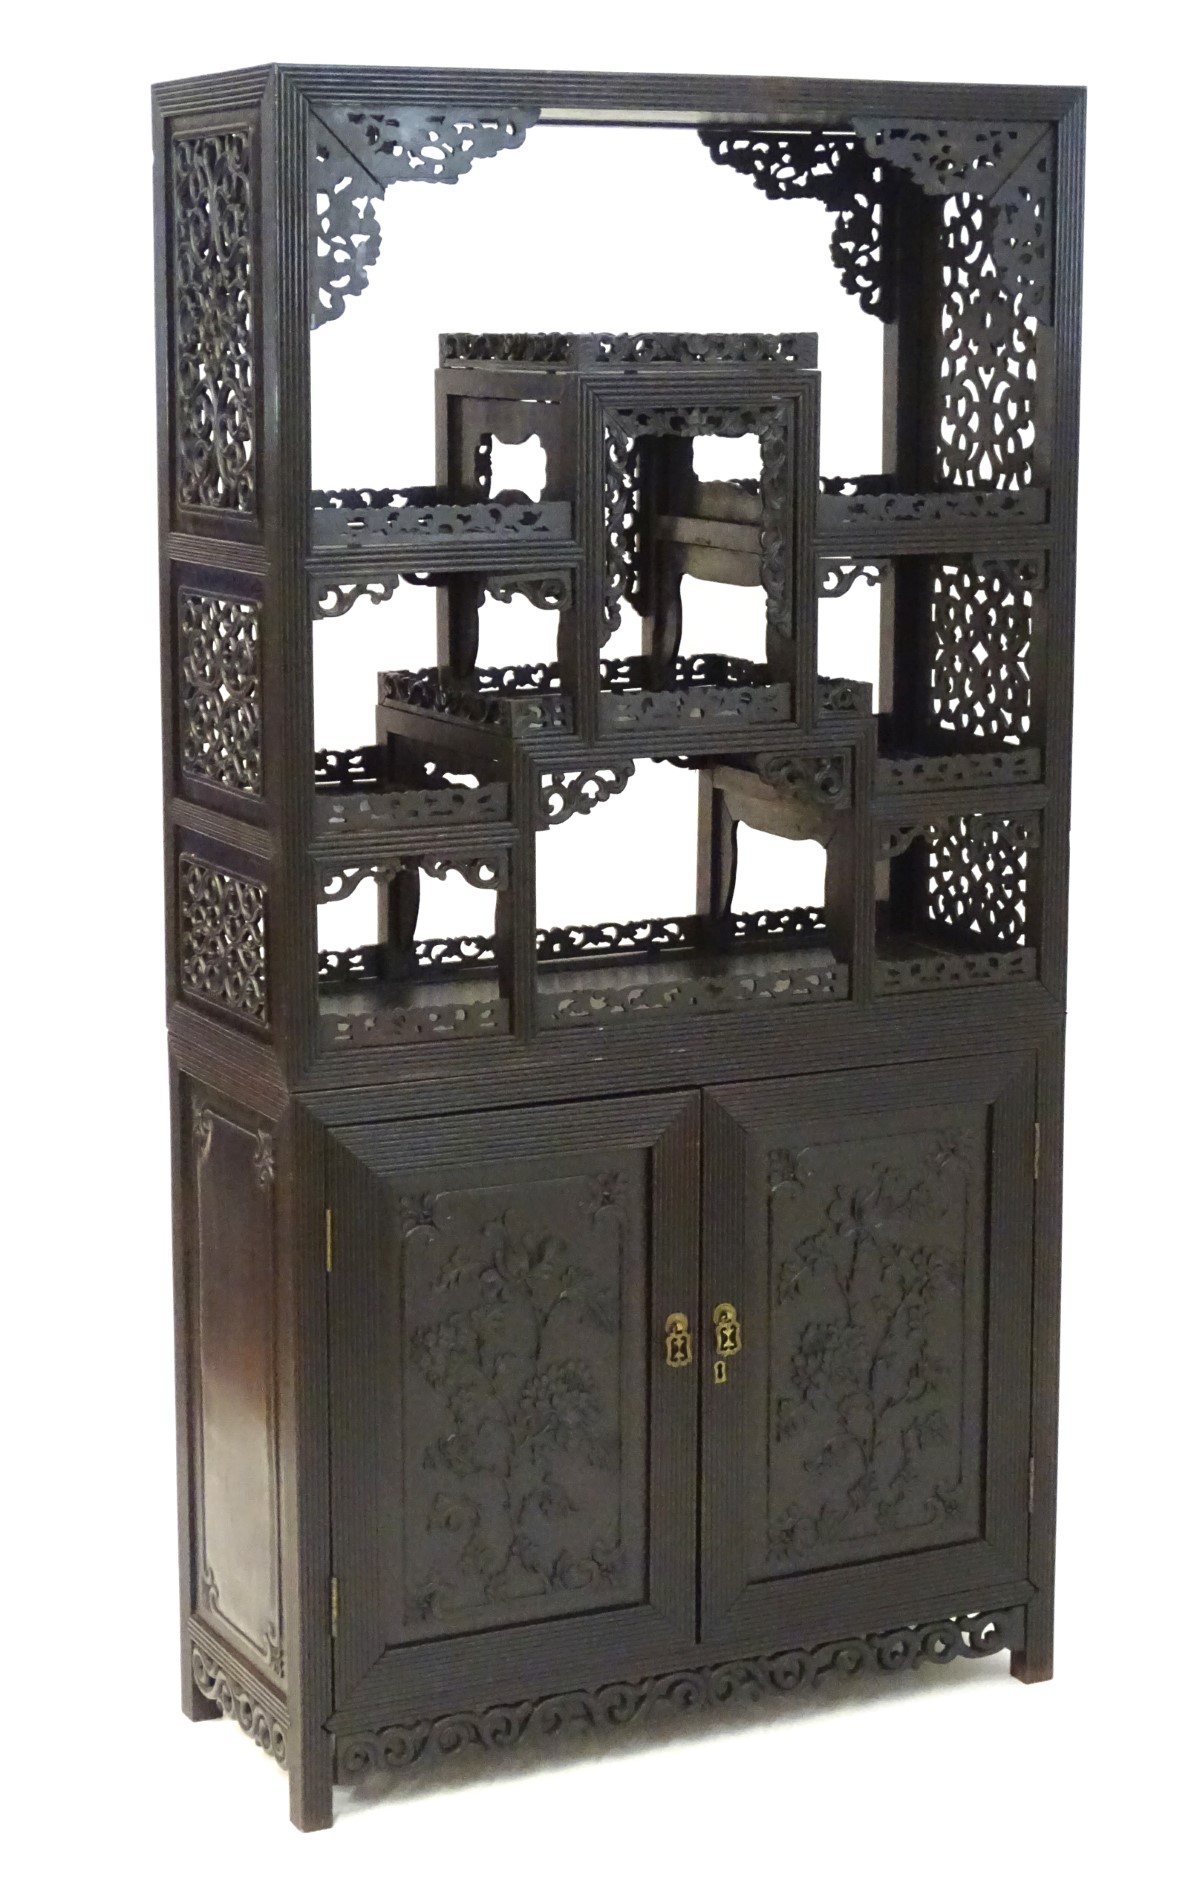 A late 19thC / early 20thC Chinese hardwood cabinet with open display shelves resting on a cupboard - Image 7 of 10